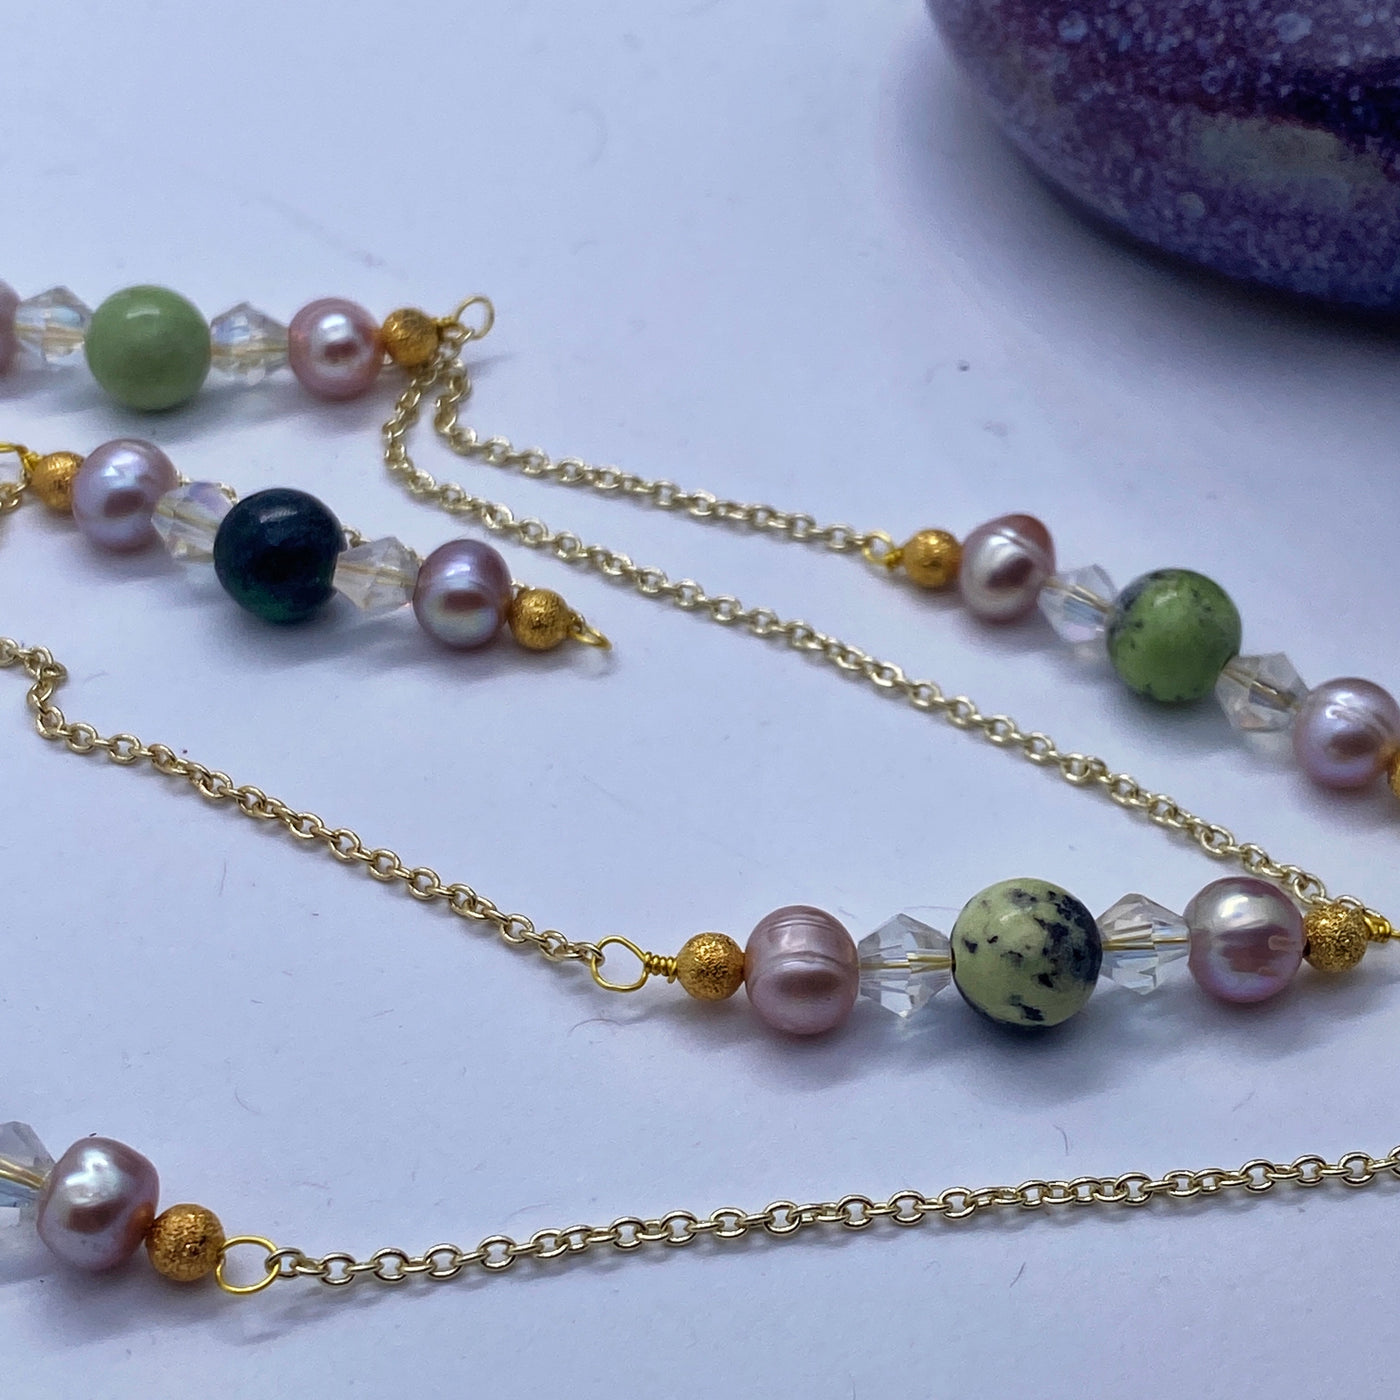 Yellow/green turquoise, freshwater pearls and crystals bycones on brass chain